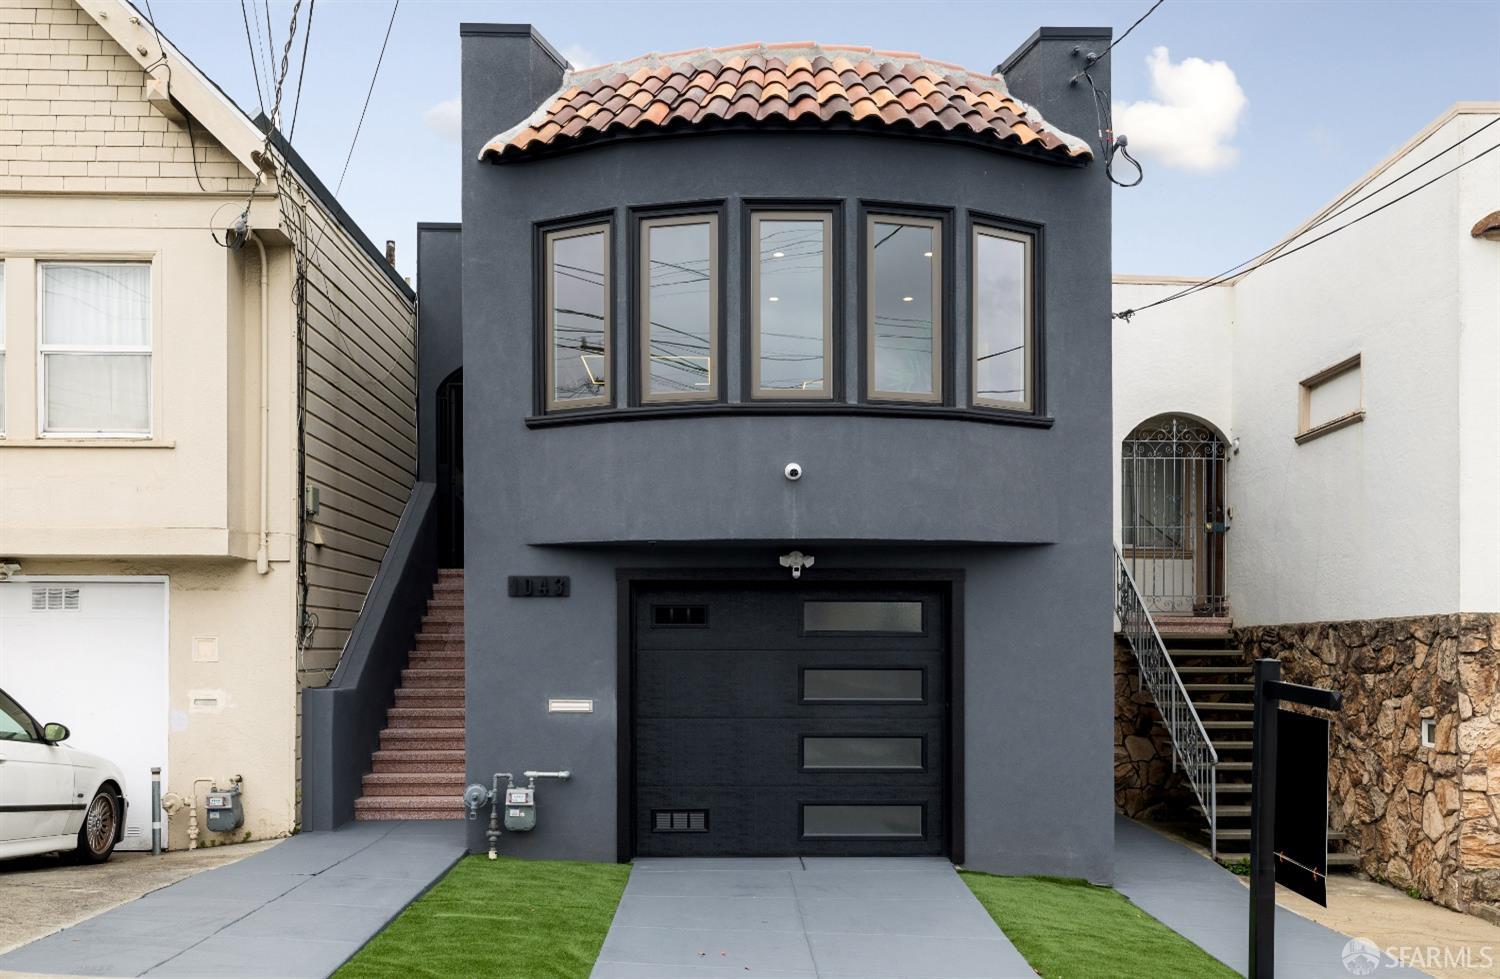 Photo of 1043 Plymouth Ave in San Francisco, CA